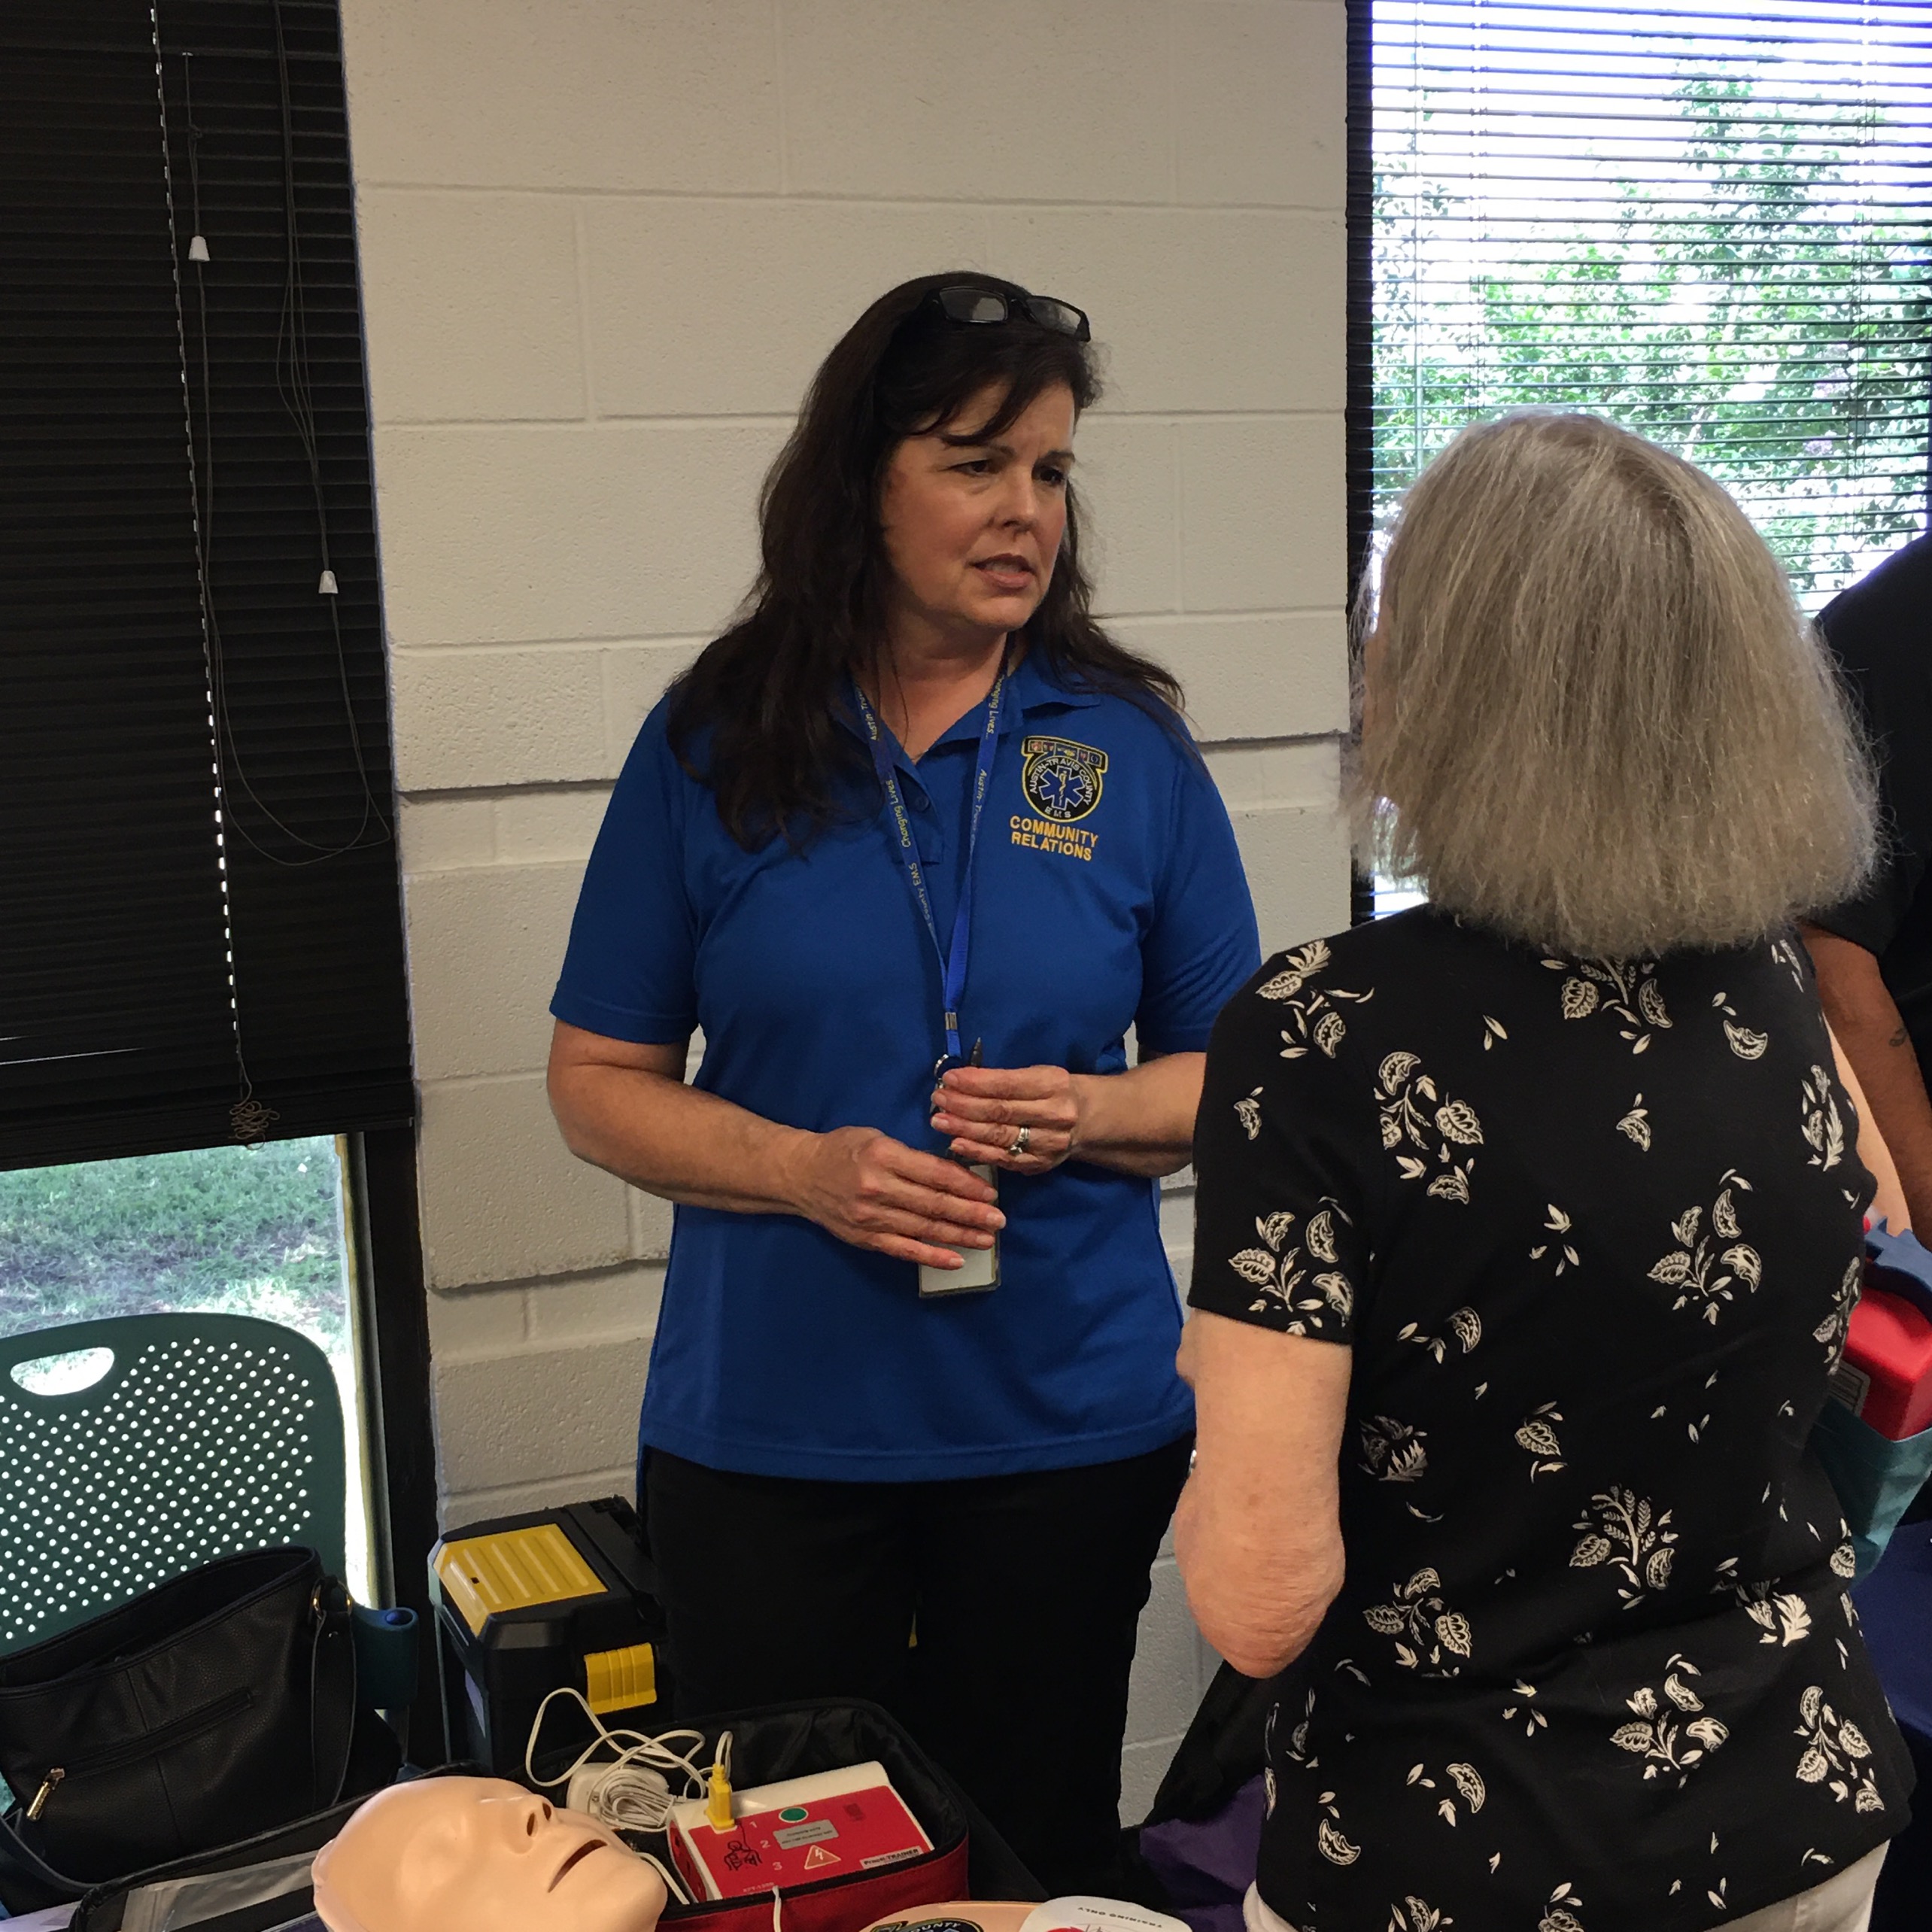 Woman speaks to an elderly woman at a presentation booth about emergency preparedness.